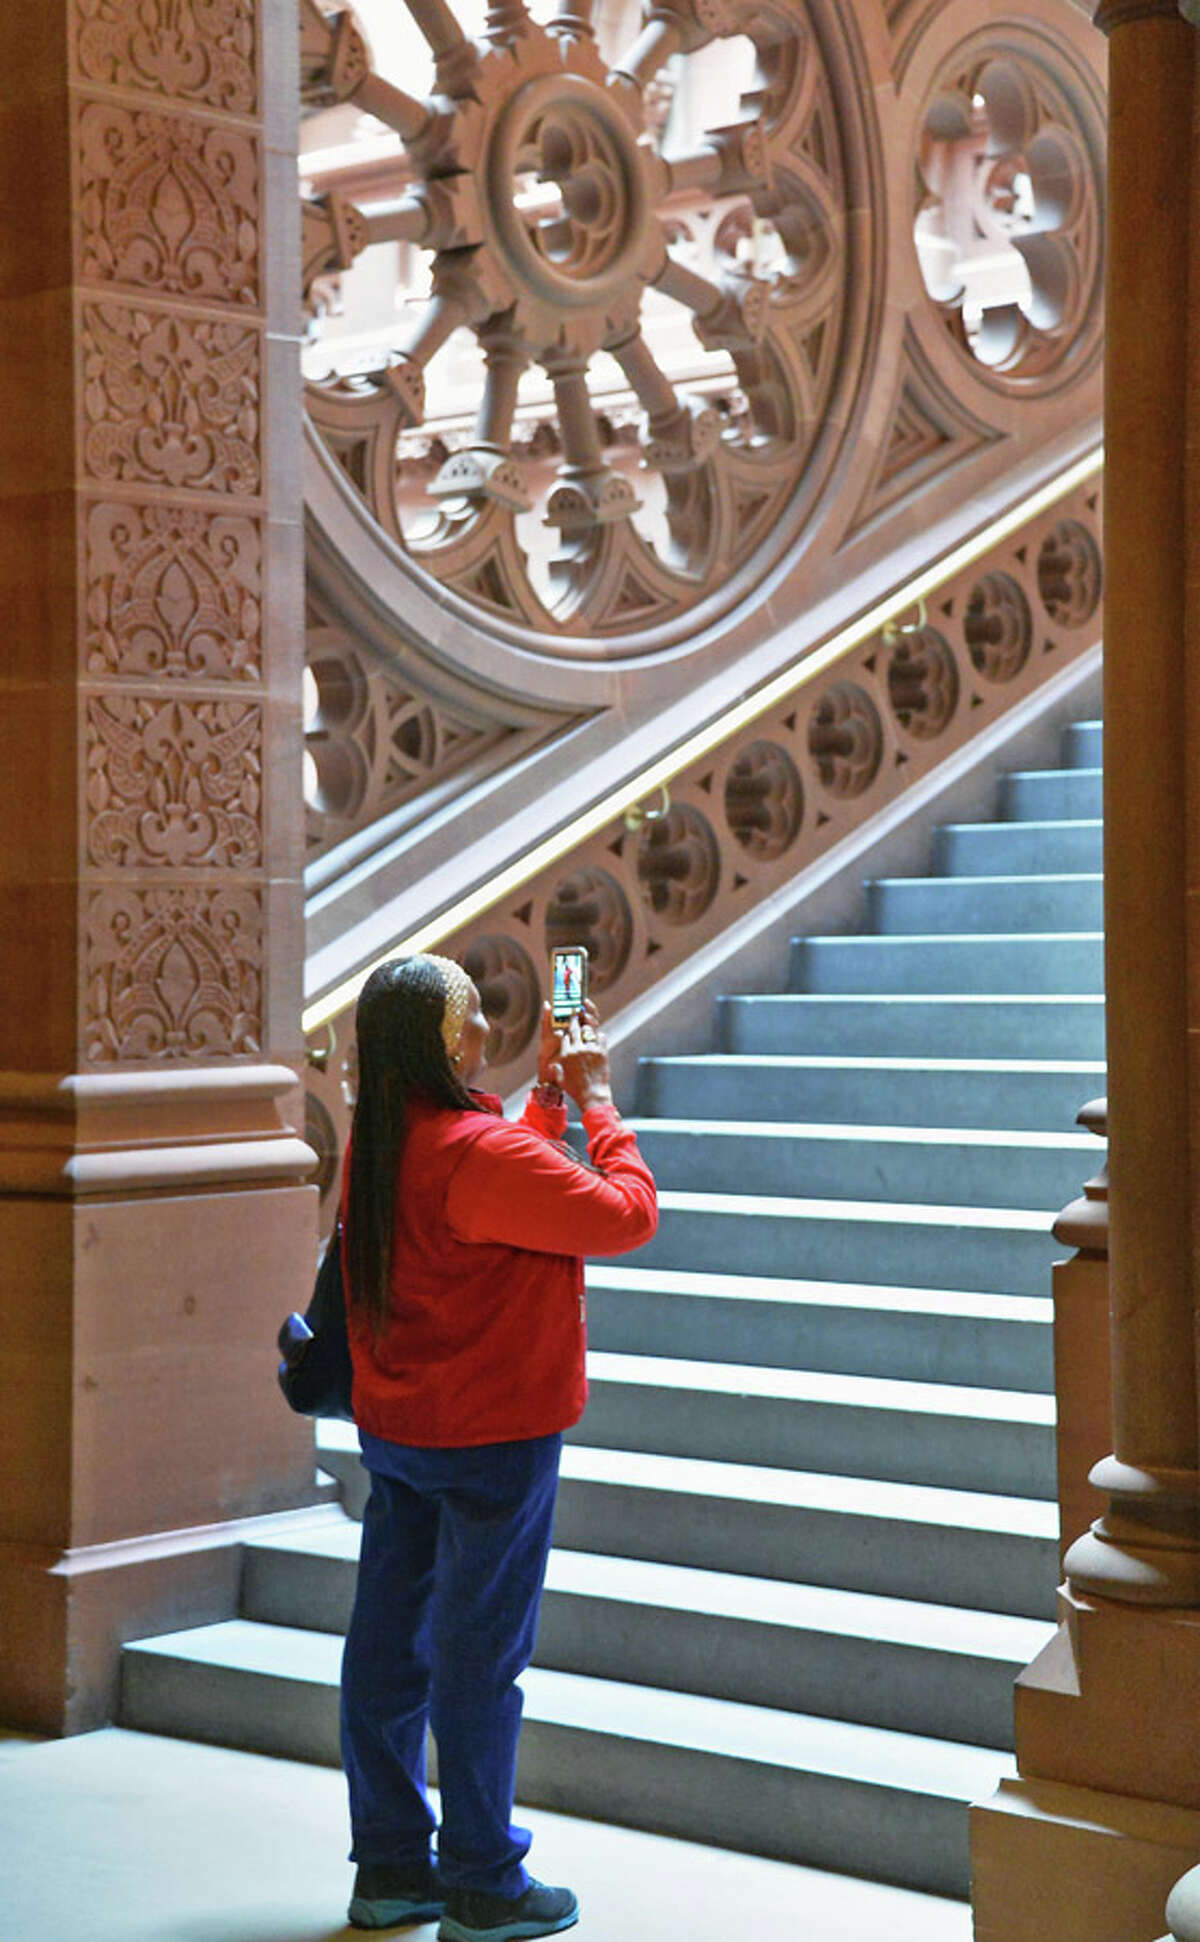 AARP care givers advocate Loraine Assent of Brooklyn takes a moment to photograph on a staircase during public advocacy day at the Capitol Tuesday May 19, 2015, in Albany, NY. (John Carl D'Annibale / Times Union)